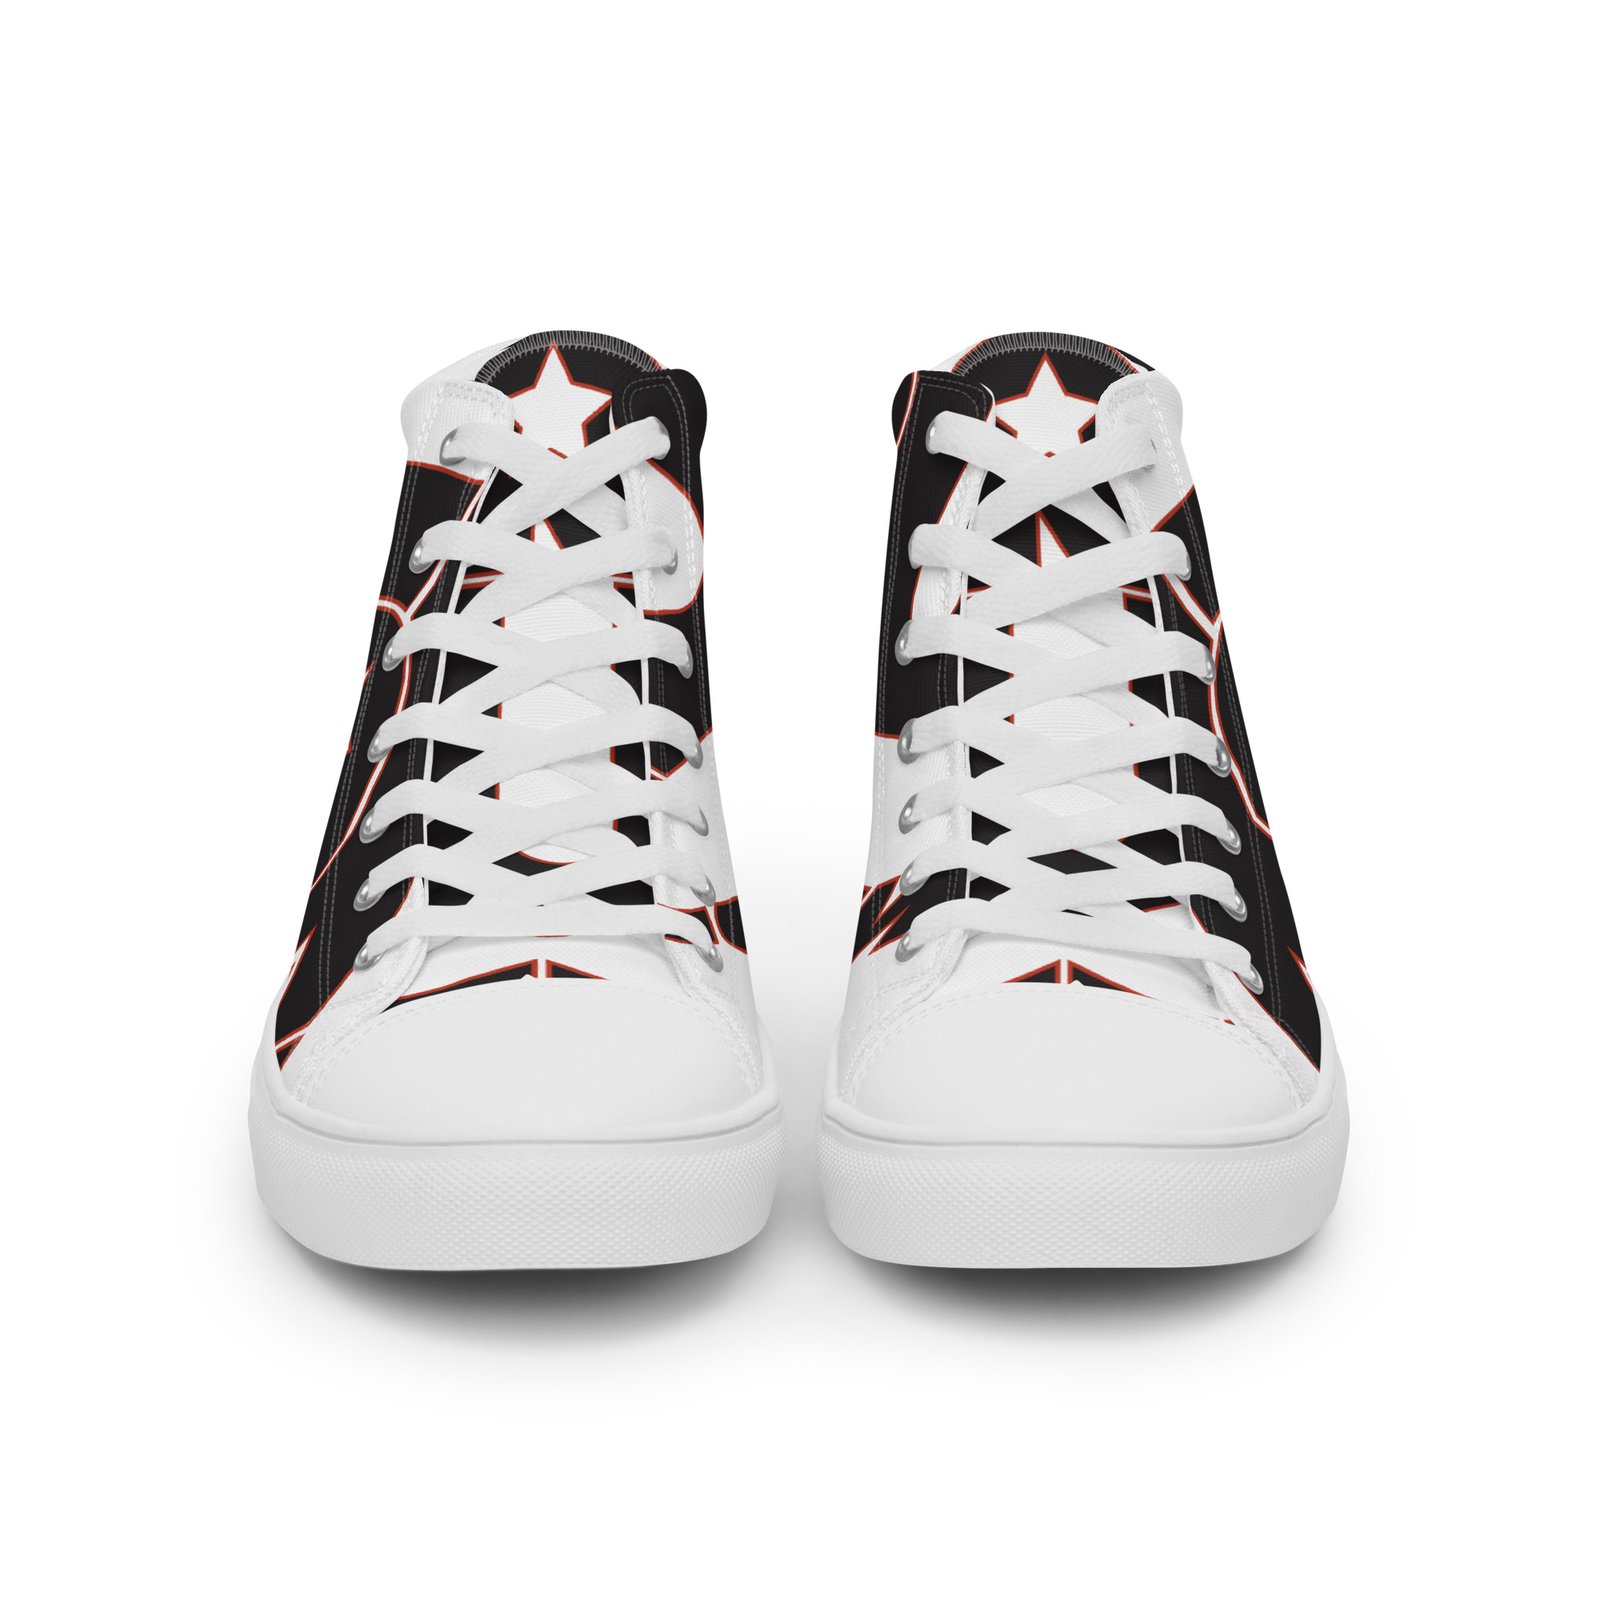 Truth Serum Clothing — Men's high top canvas shoes